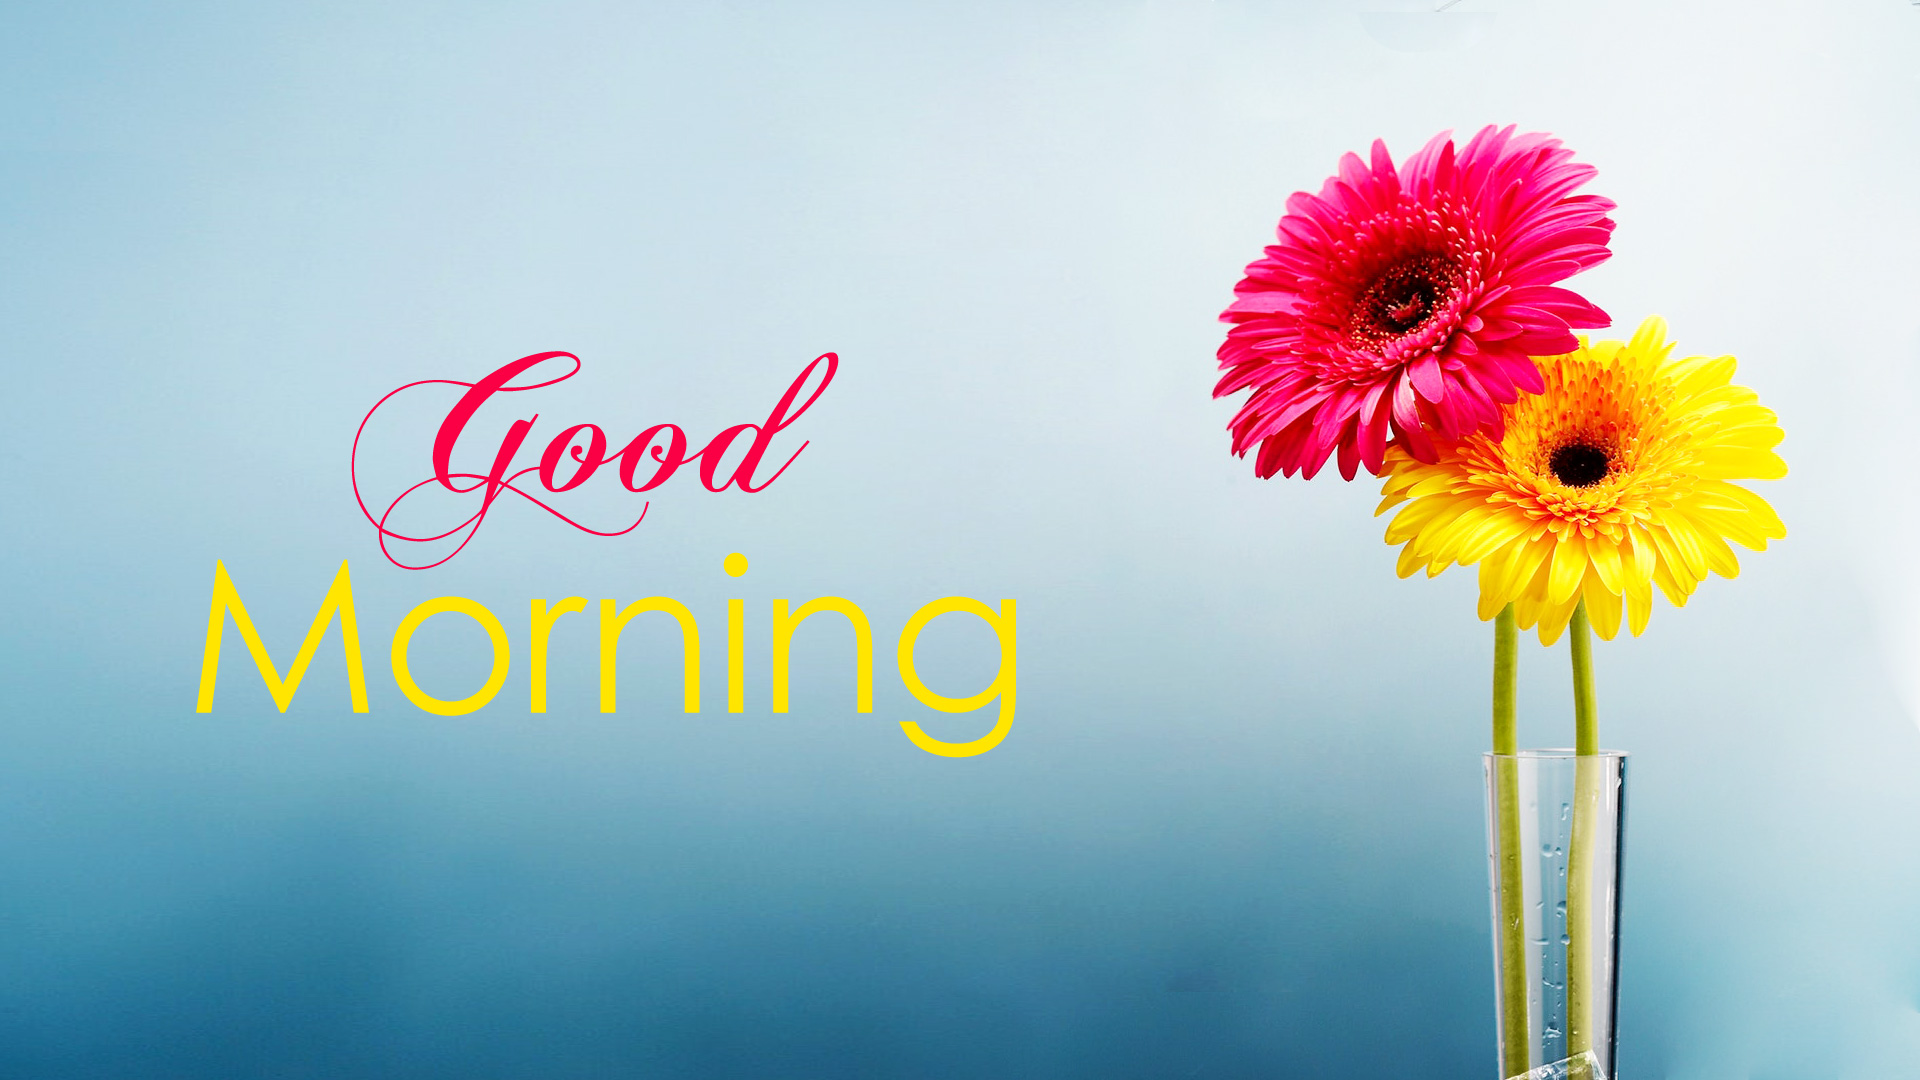 Good Morning Wallpaper with Flowers, Full HD 1920x1080 GM Images